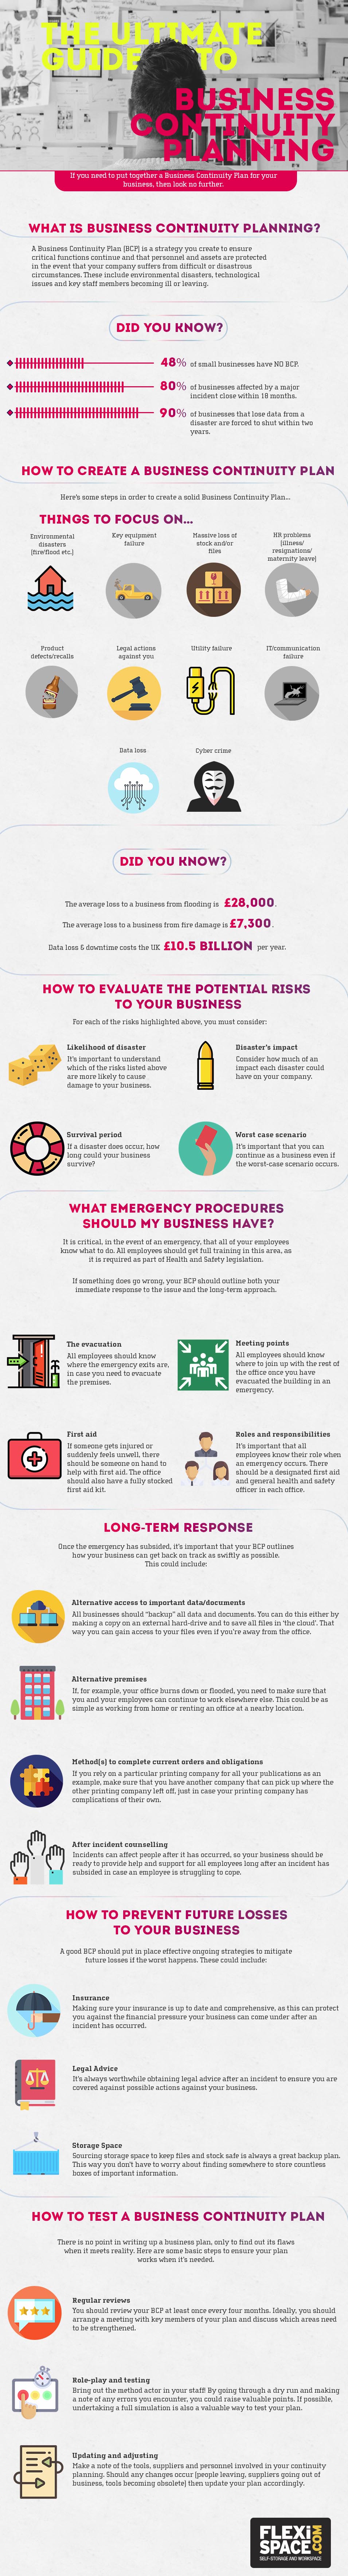 The Ultimate Guide to Business Continuity Planning